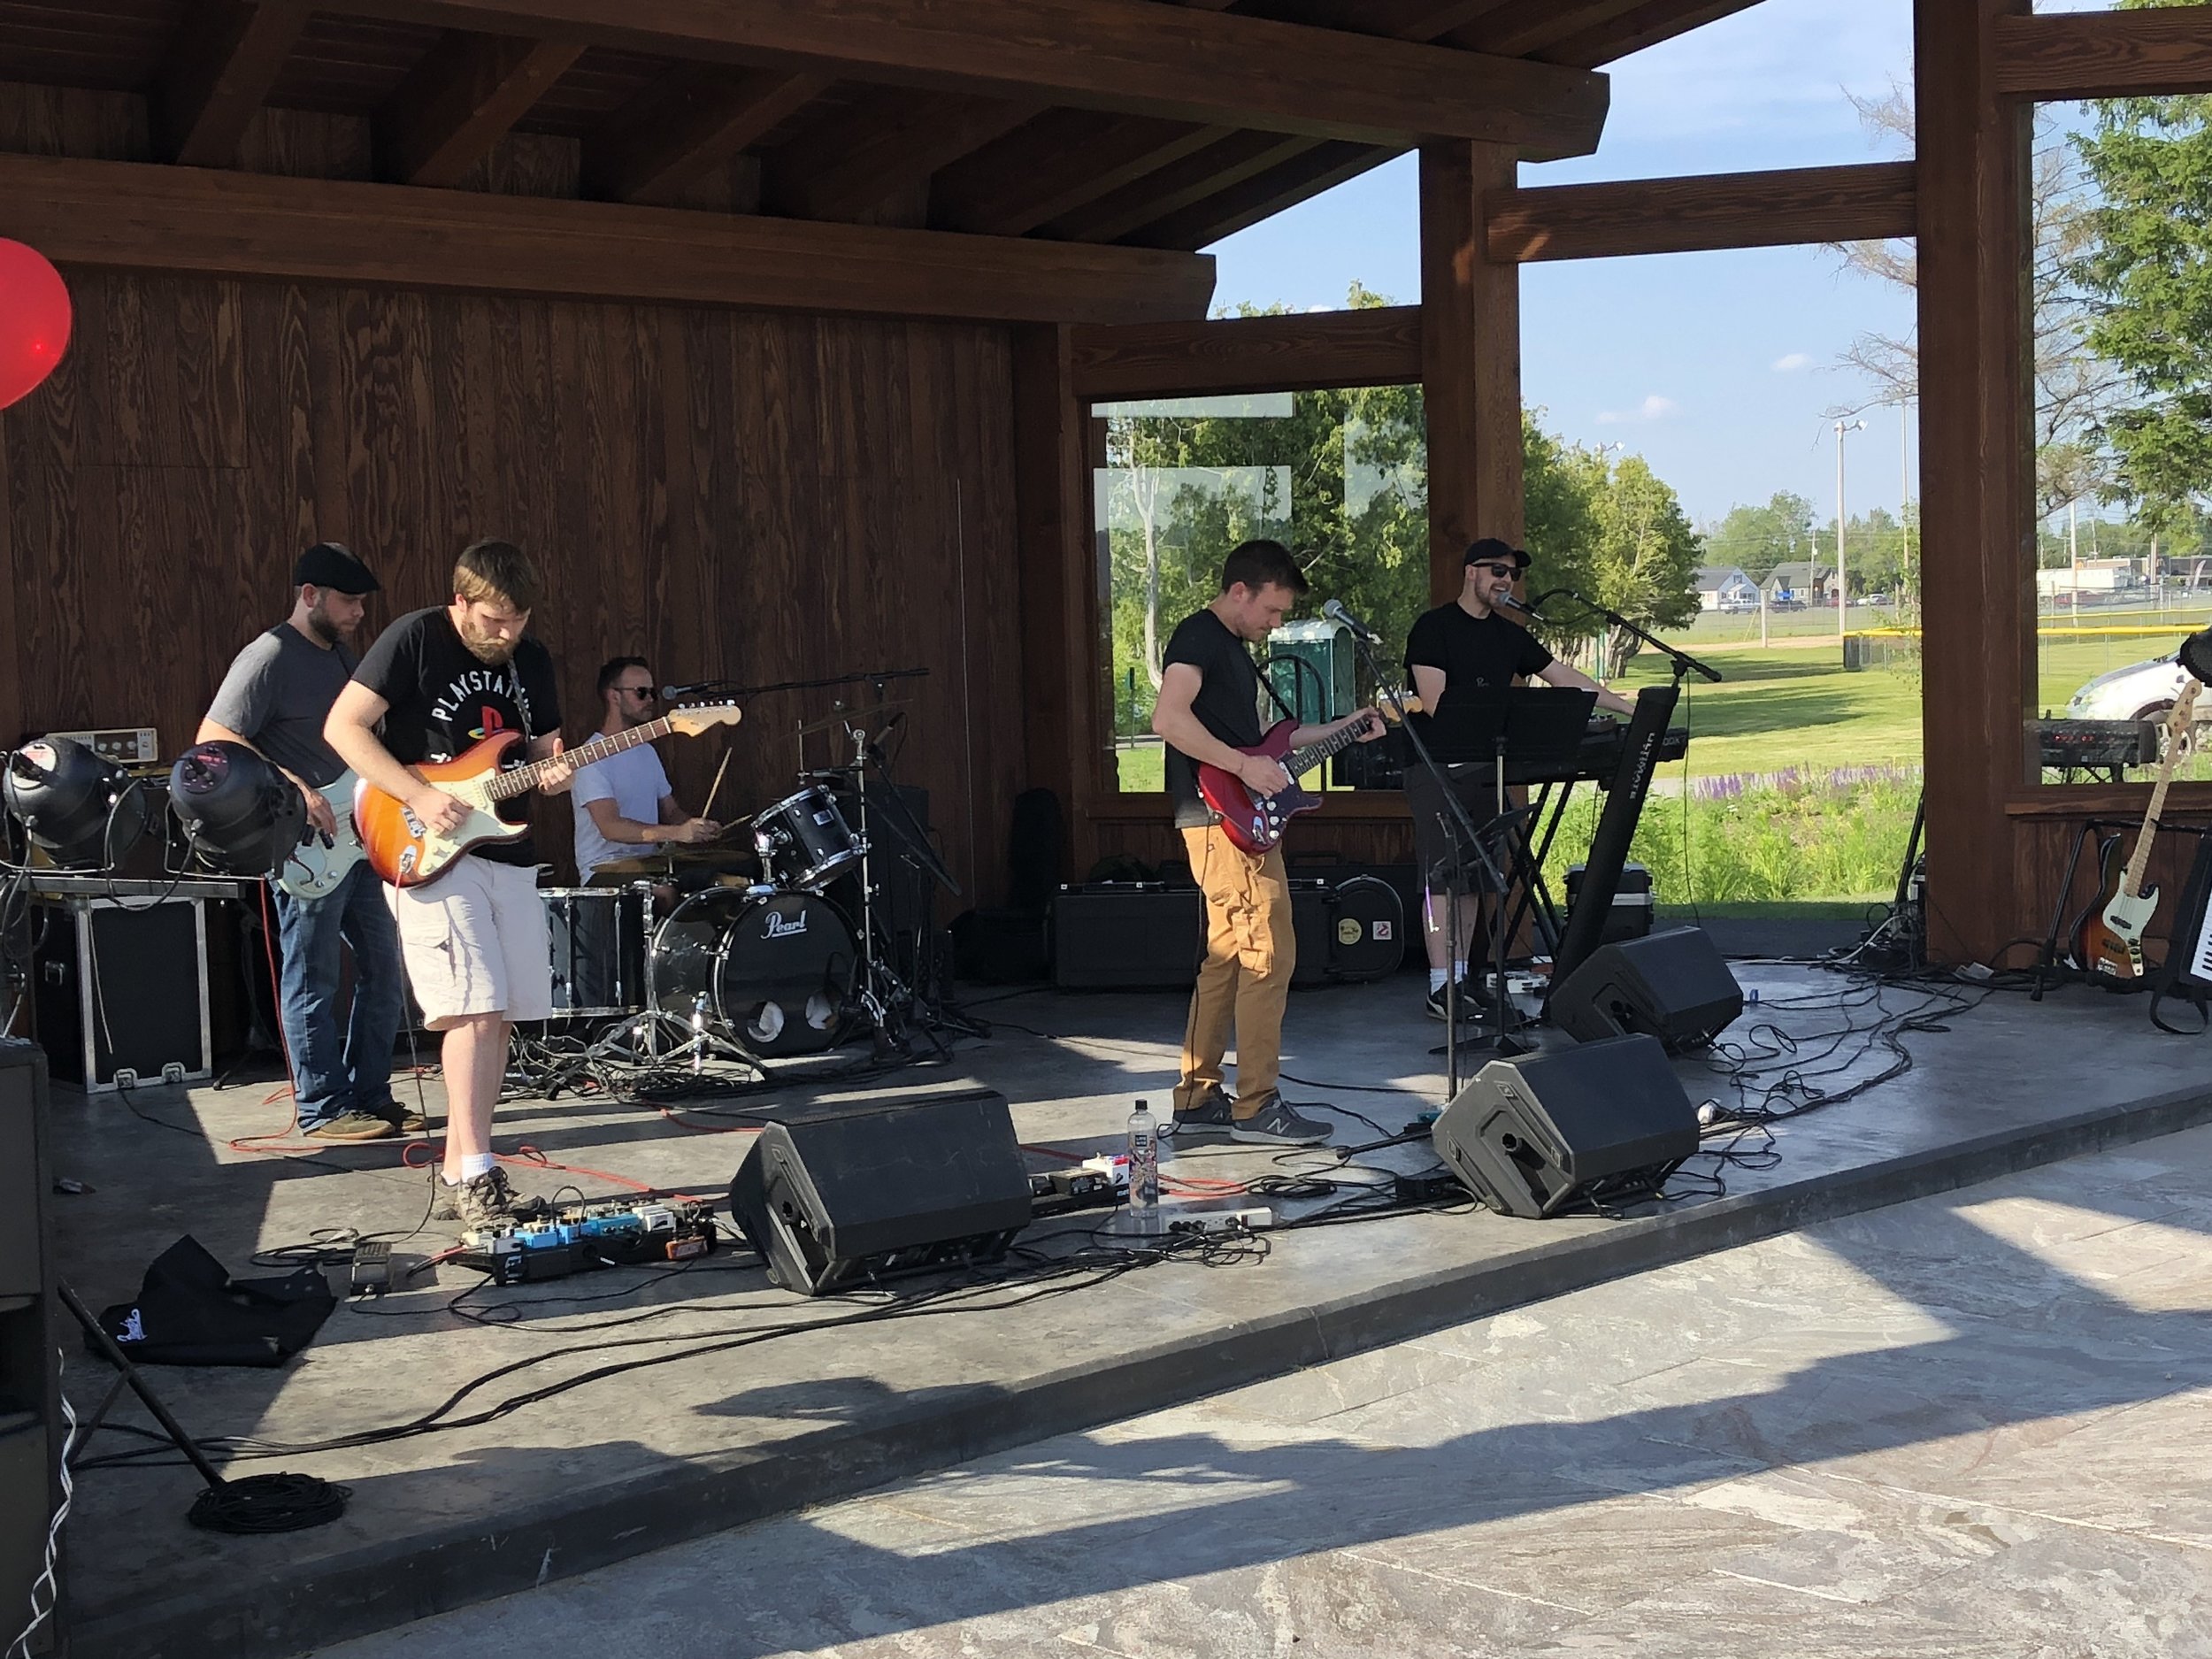   Tupper Lake's band Night School was the first entertainment group to play on what Mayor Paul Maroun has dubbed the Sunset Stage in the Lions new bandshell last Wednesday as part of a summer-long series of concerts and performances brought to Flande